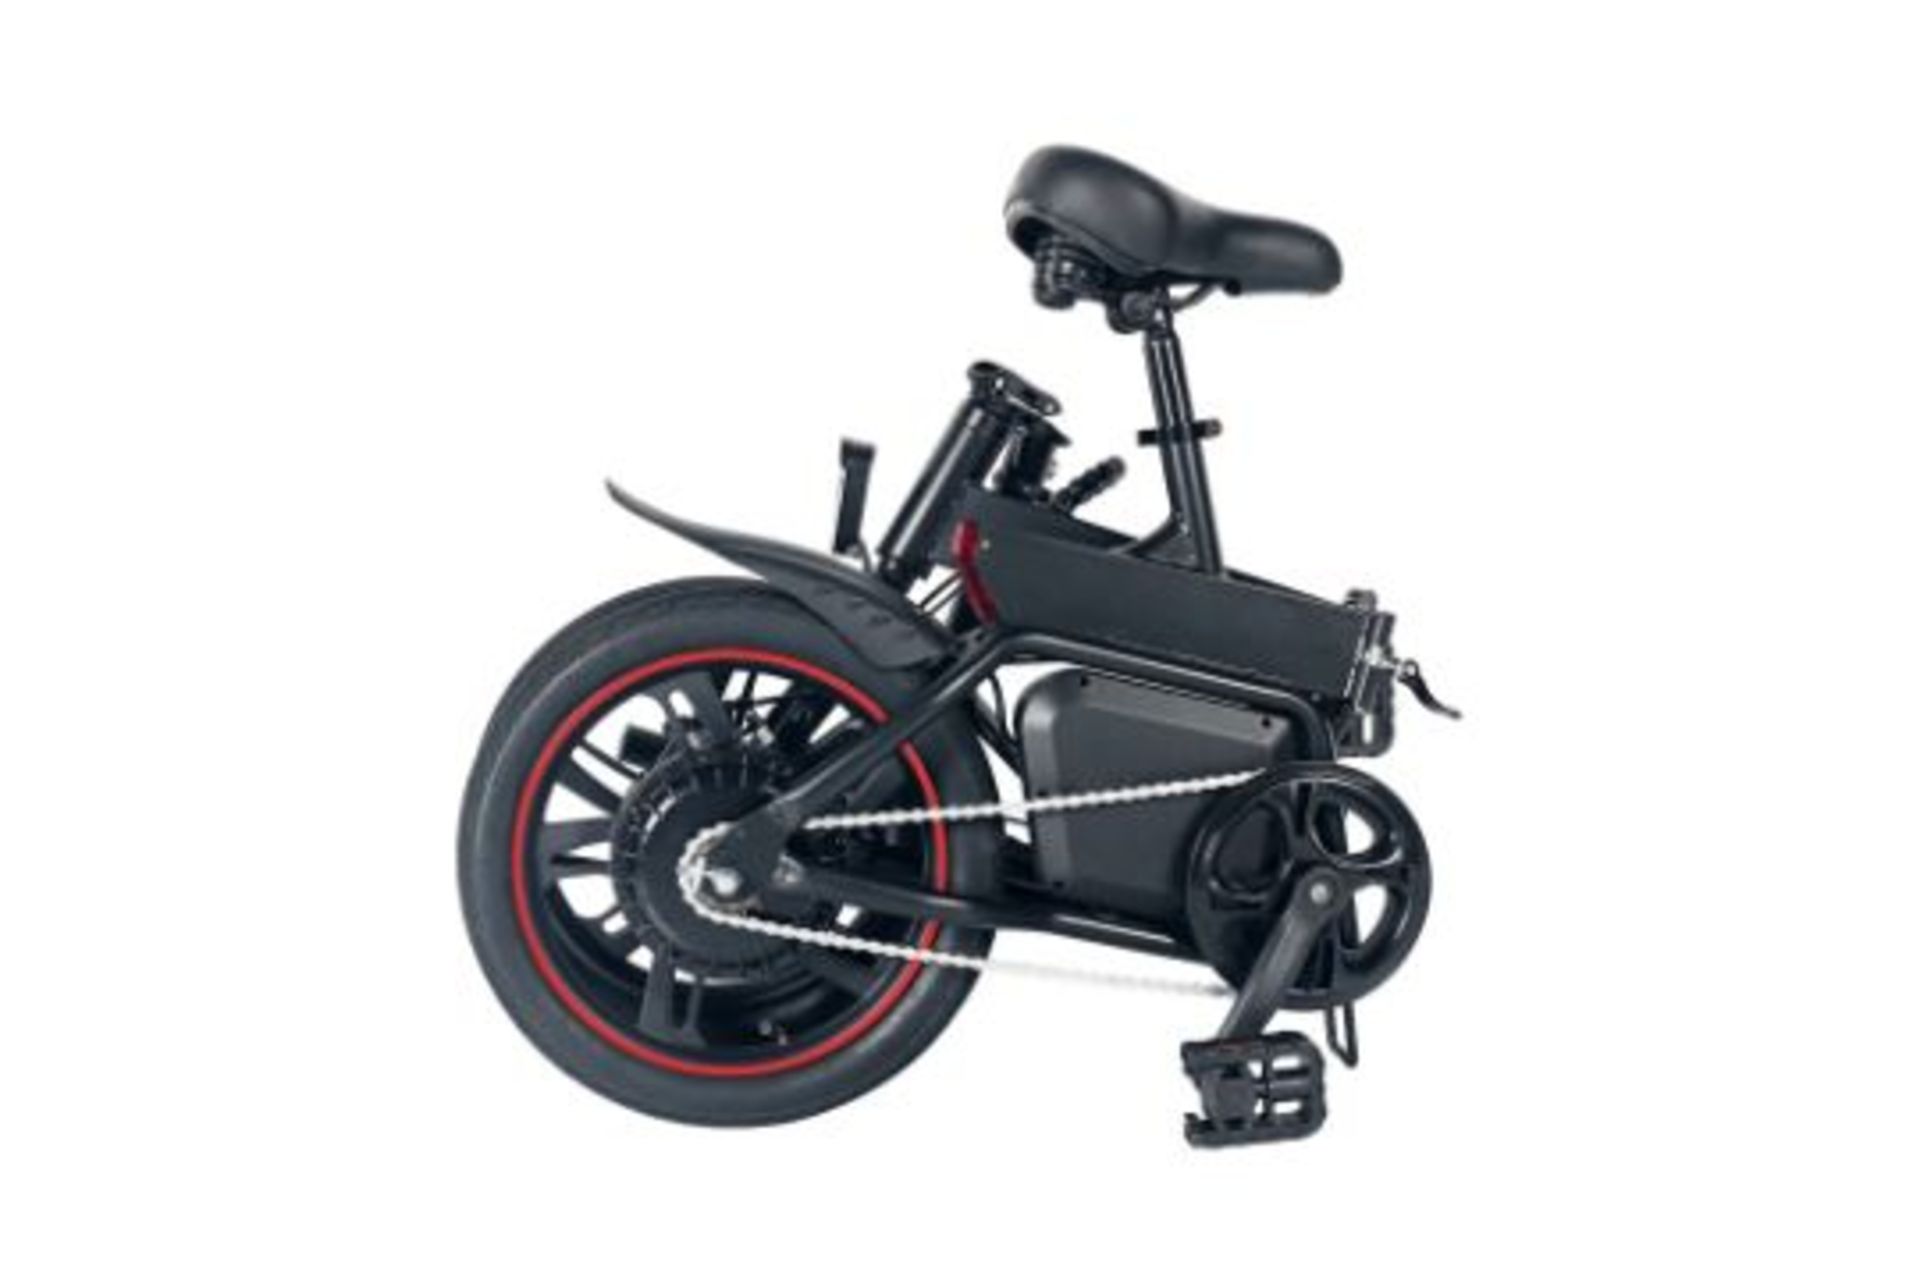 5 X BRAND NEW Windgoo B20 Pro Electric Bike. RRP £1,100.99. With 16-inch-wide tires and a frame of - Image 2 of 3